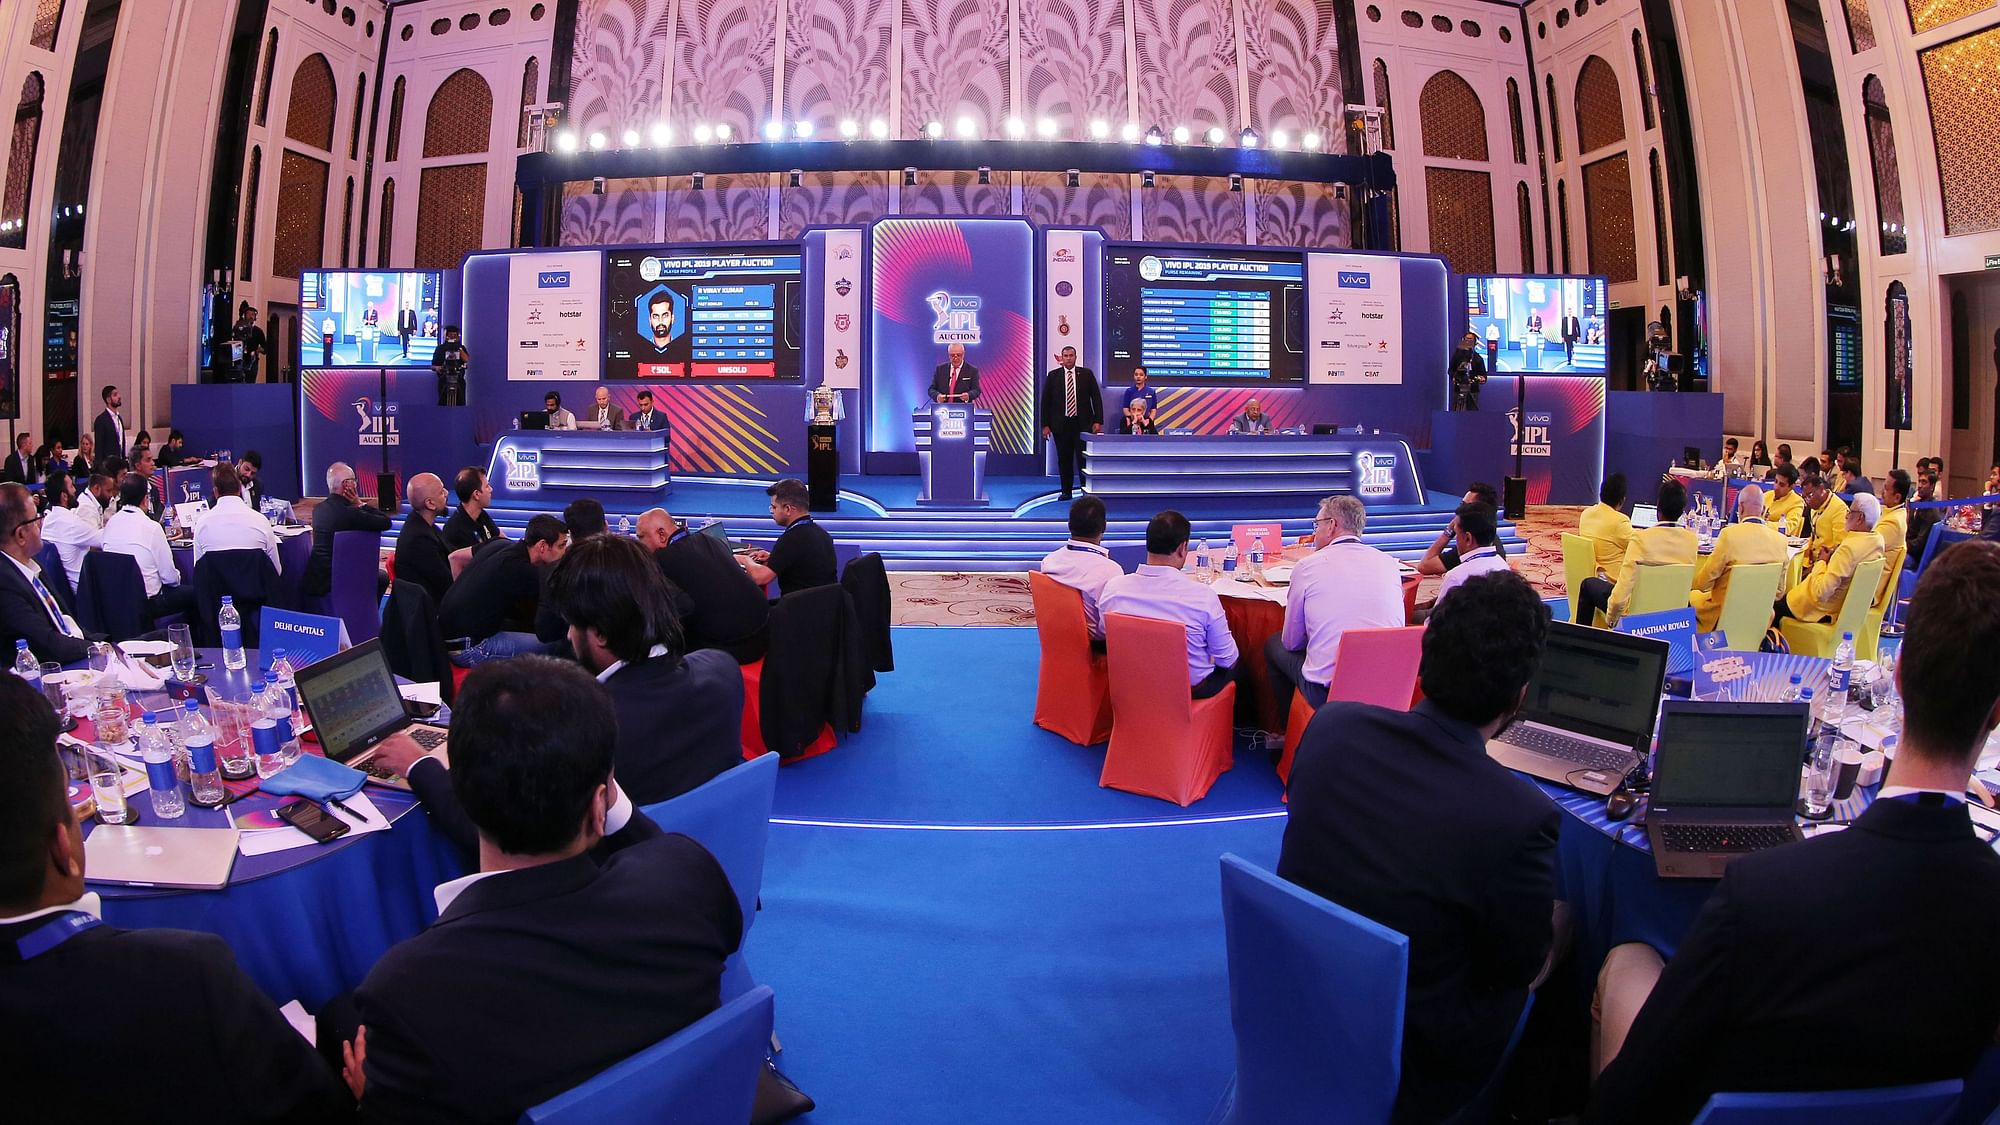 IPL Players Auction 2020: A look at some of India’s young cricketers who are awaiting their IPL destiny at the auction.